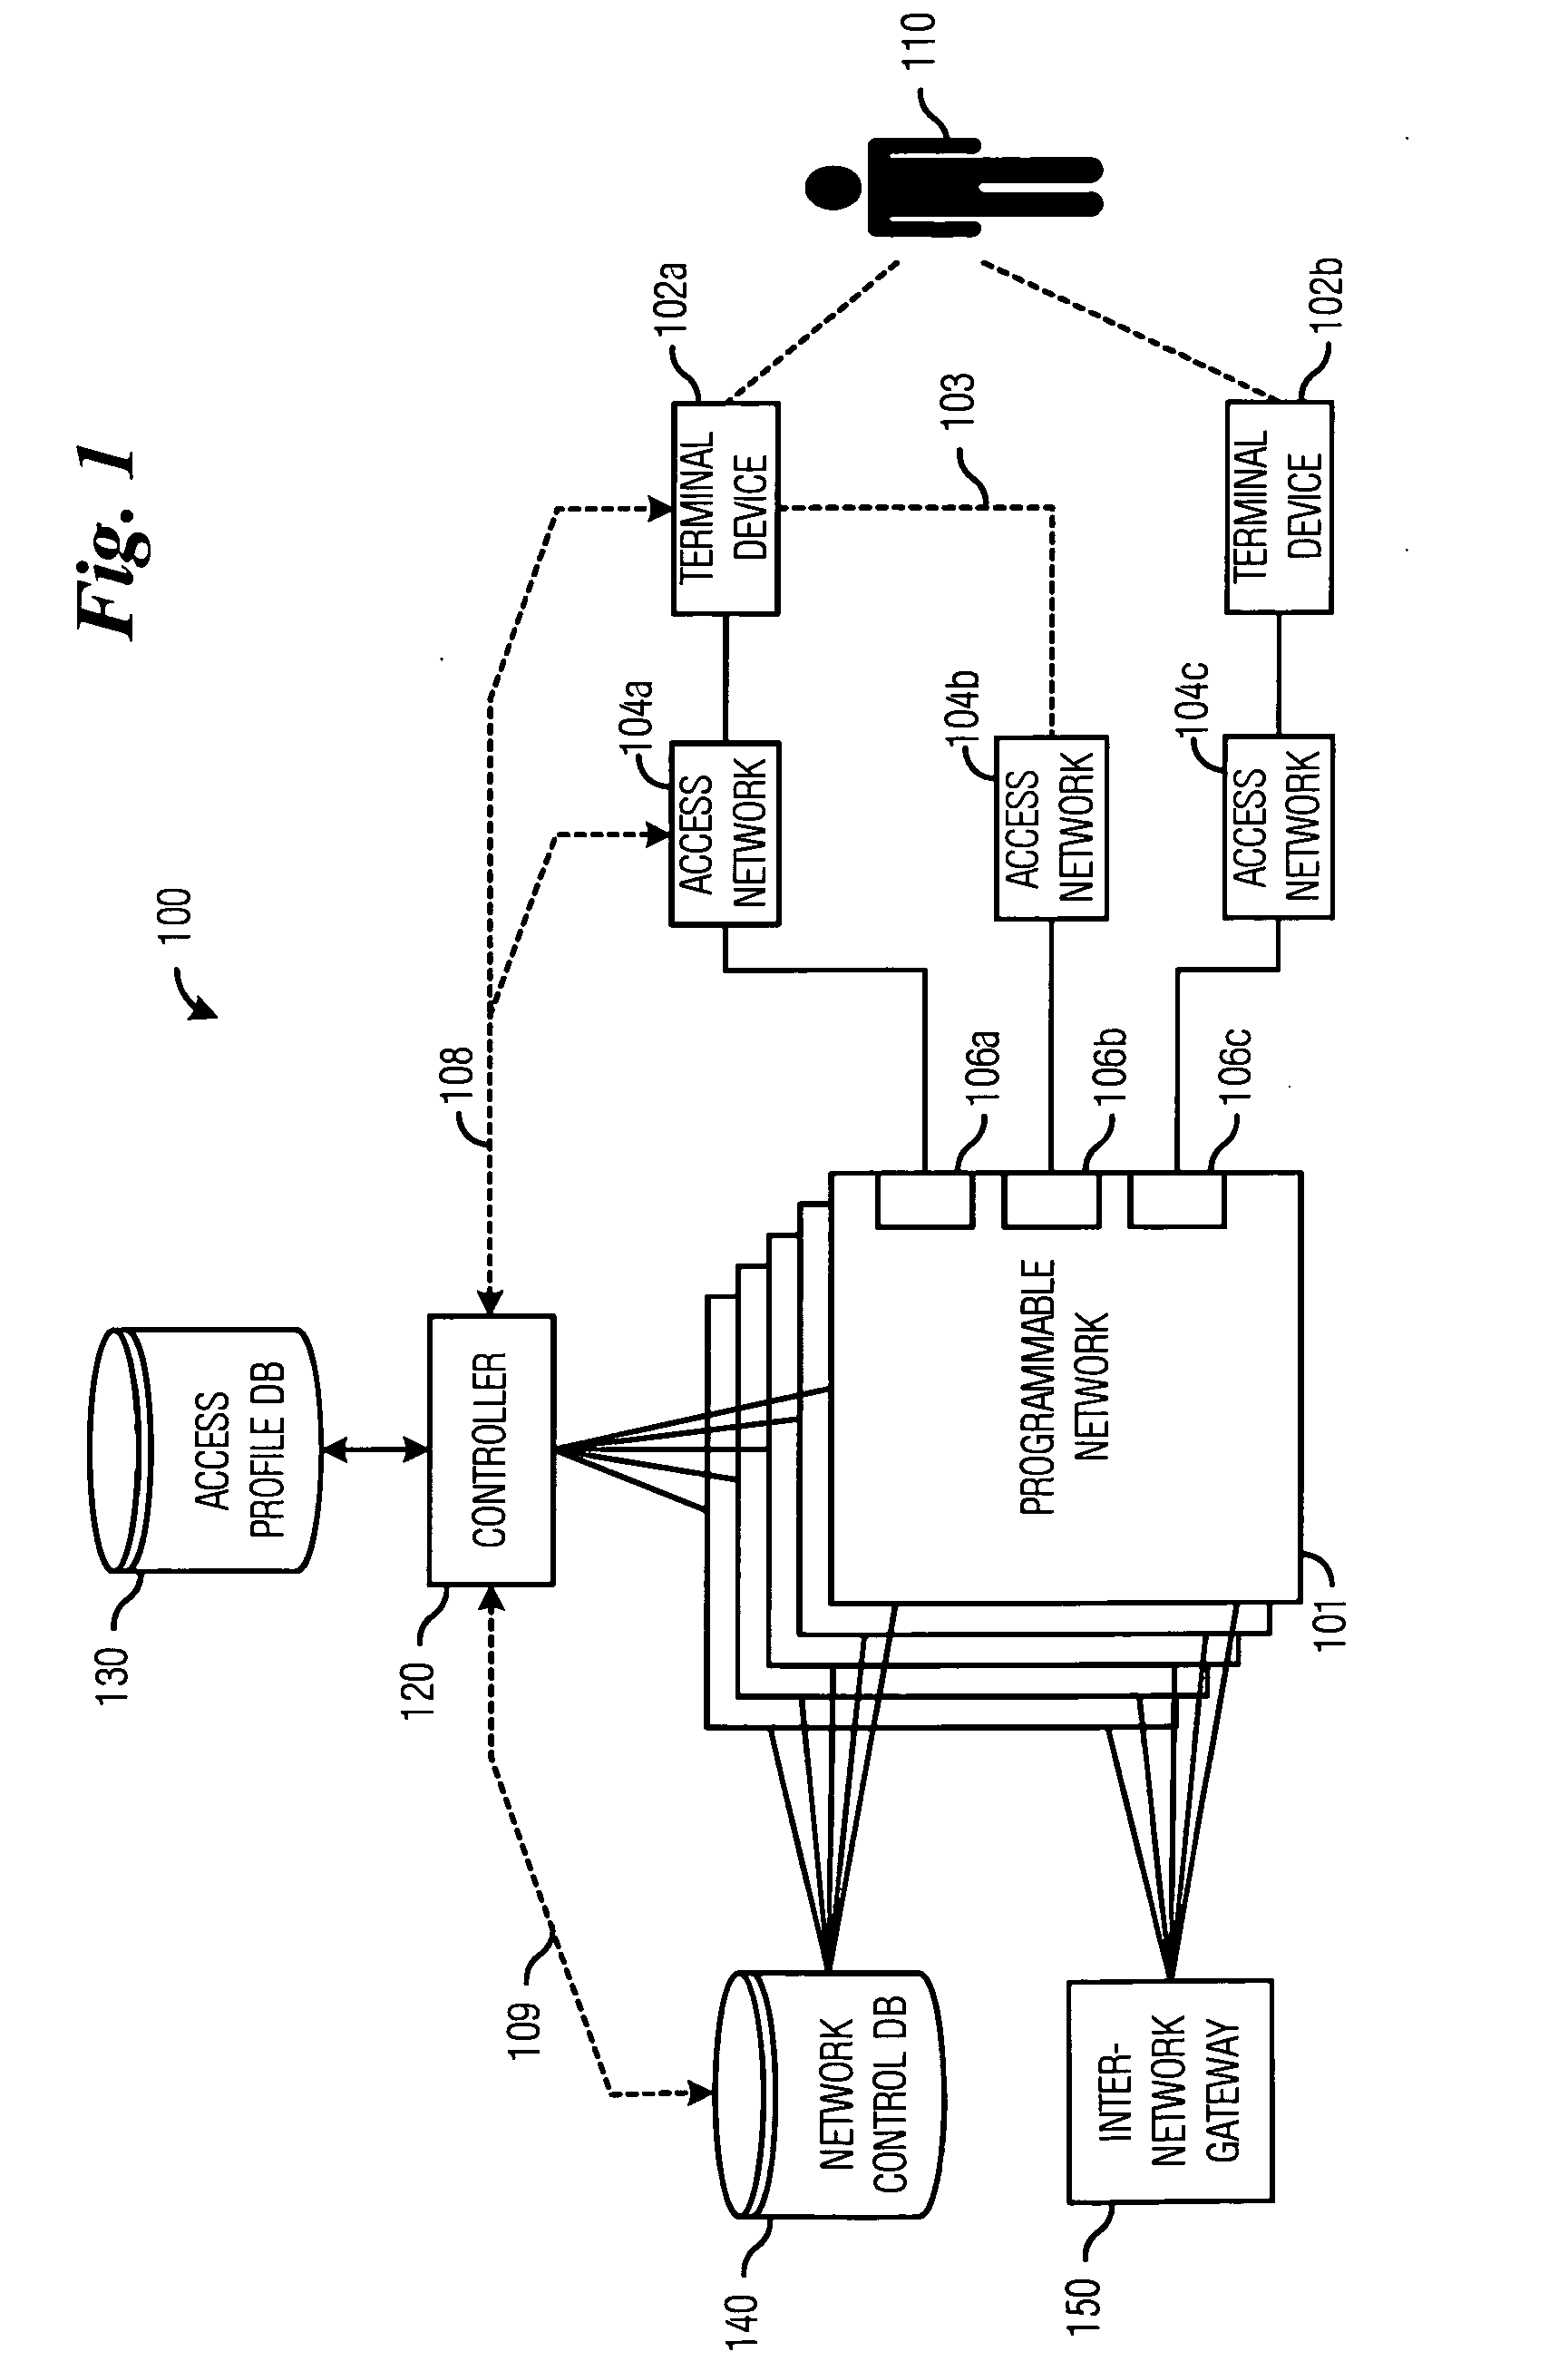 System and method for providing service-agnostic network resources